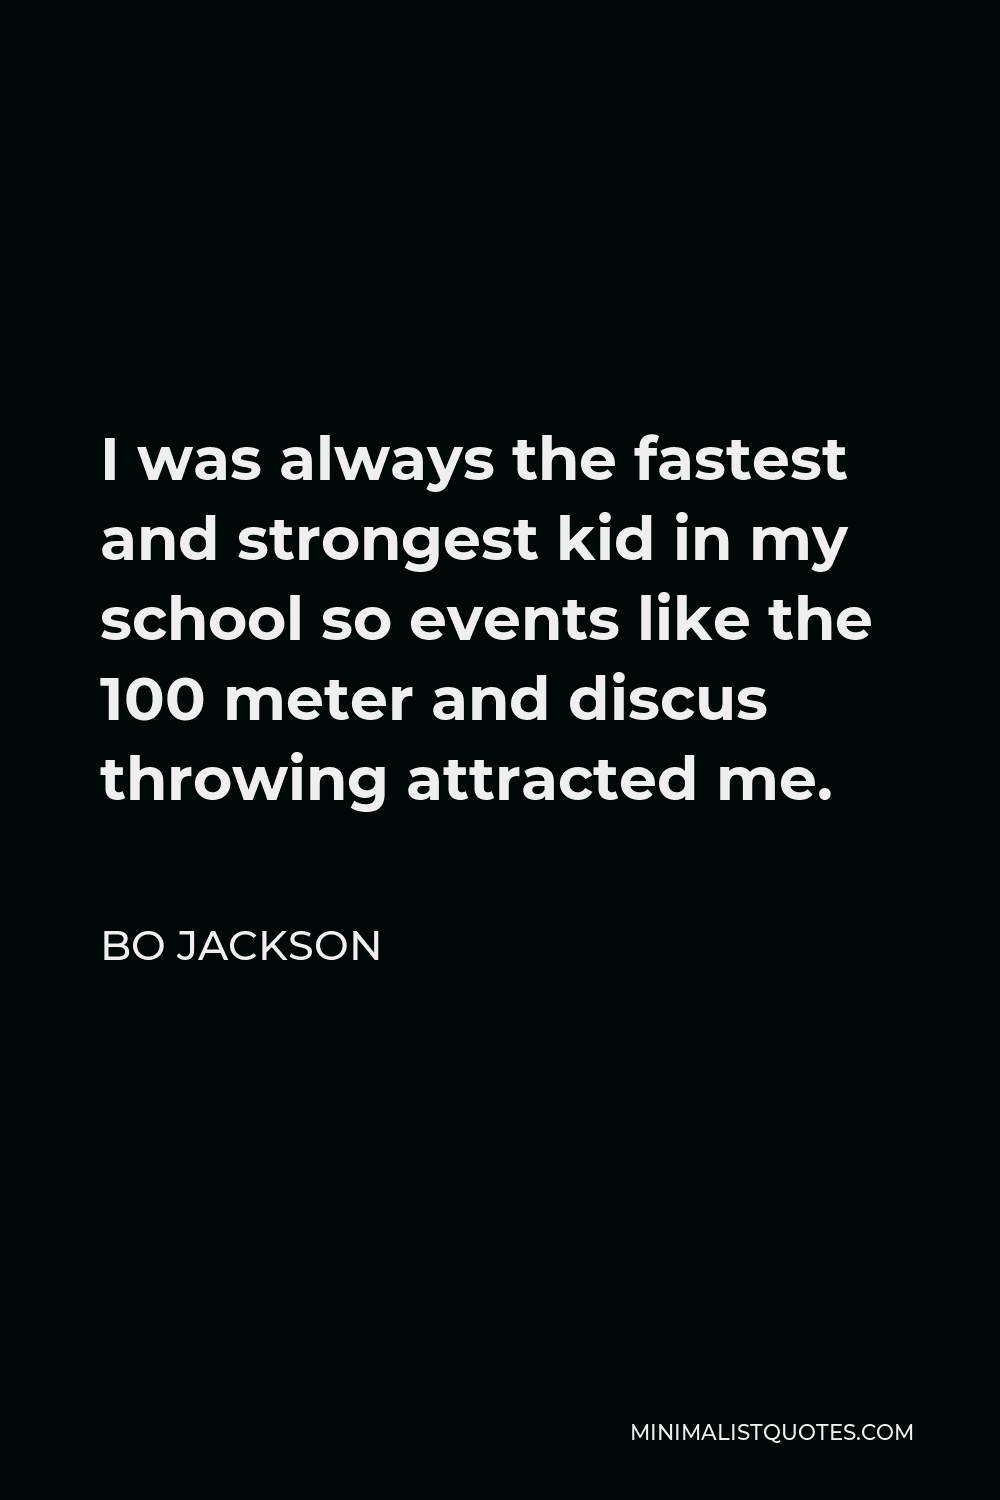 Bo Jackson Quote - I was always the fastest and strongest kid in my school so events like the 100 meter and discus throwing attracted me.